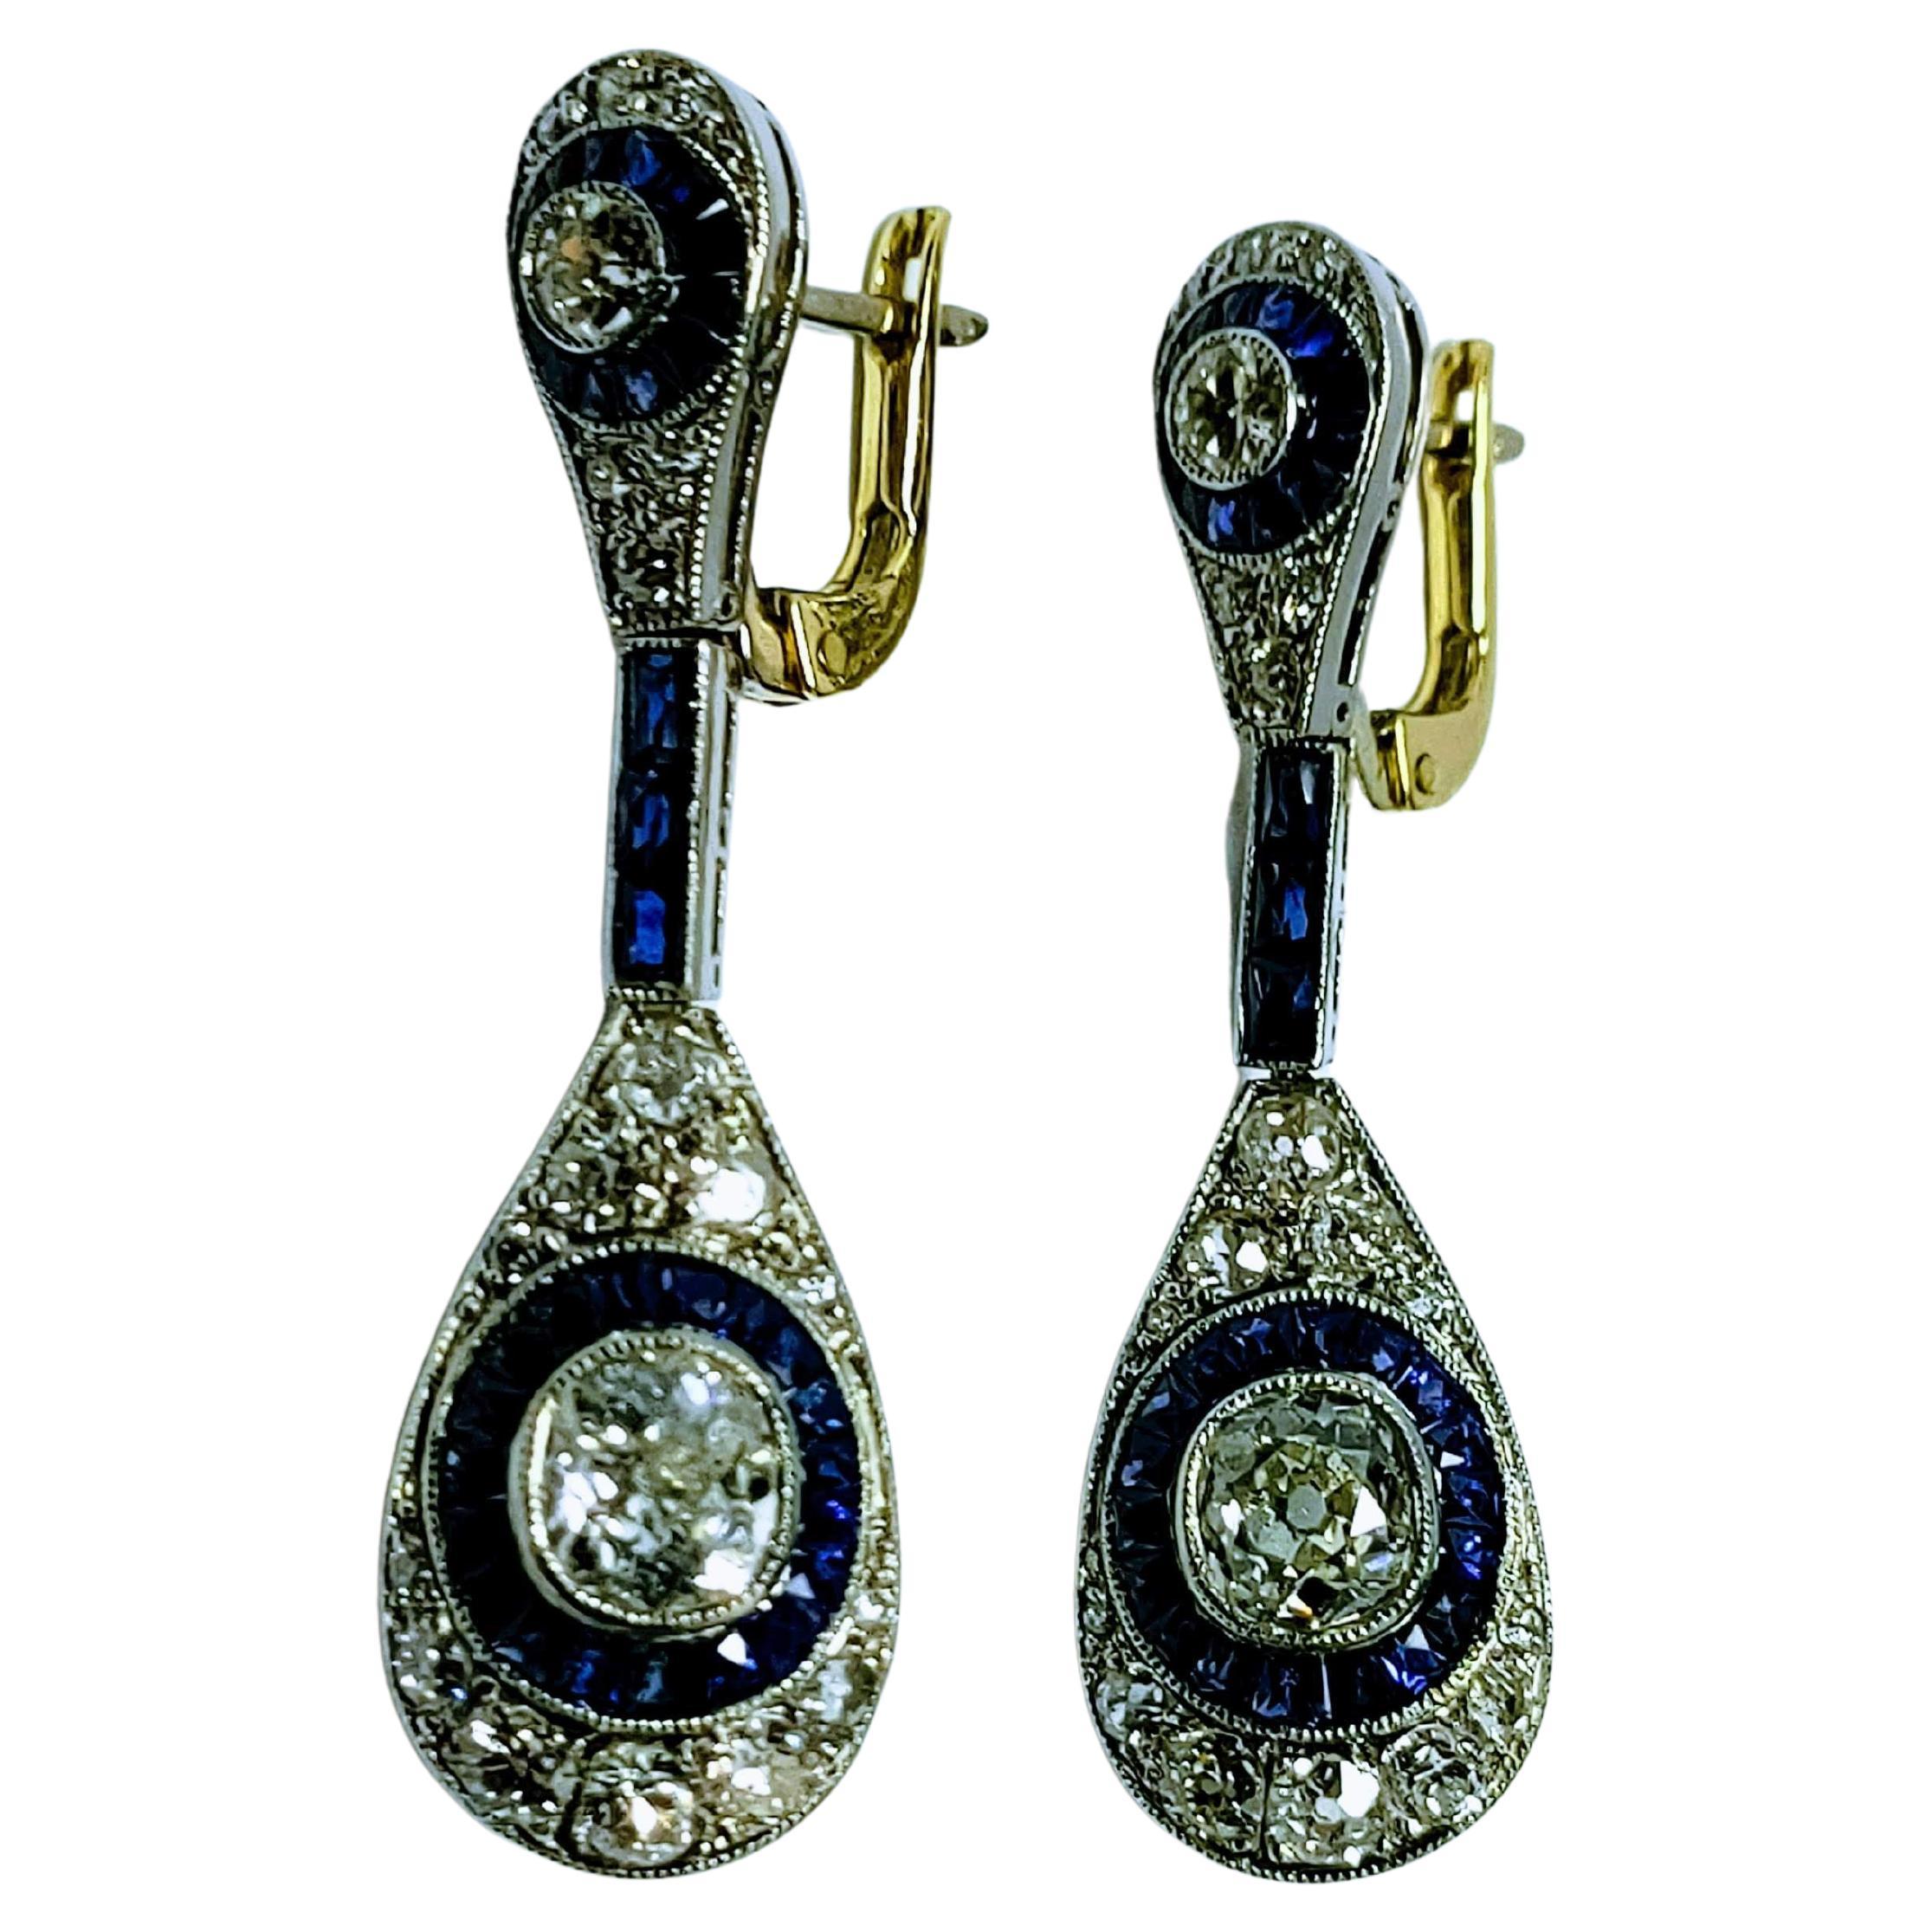 Magnificent and sophisticated Art deco 1930s earrings made of platinum, weight 8.72 grams. It consists of two pieces in the form of articulated pears, at the bottom two old mine cut diamonds of 6.5x5.8x3 millimeters individual weight 0.70 carats